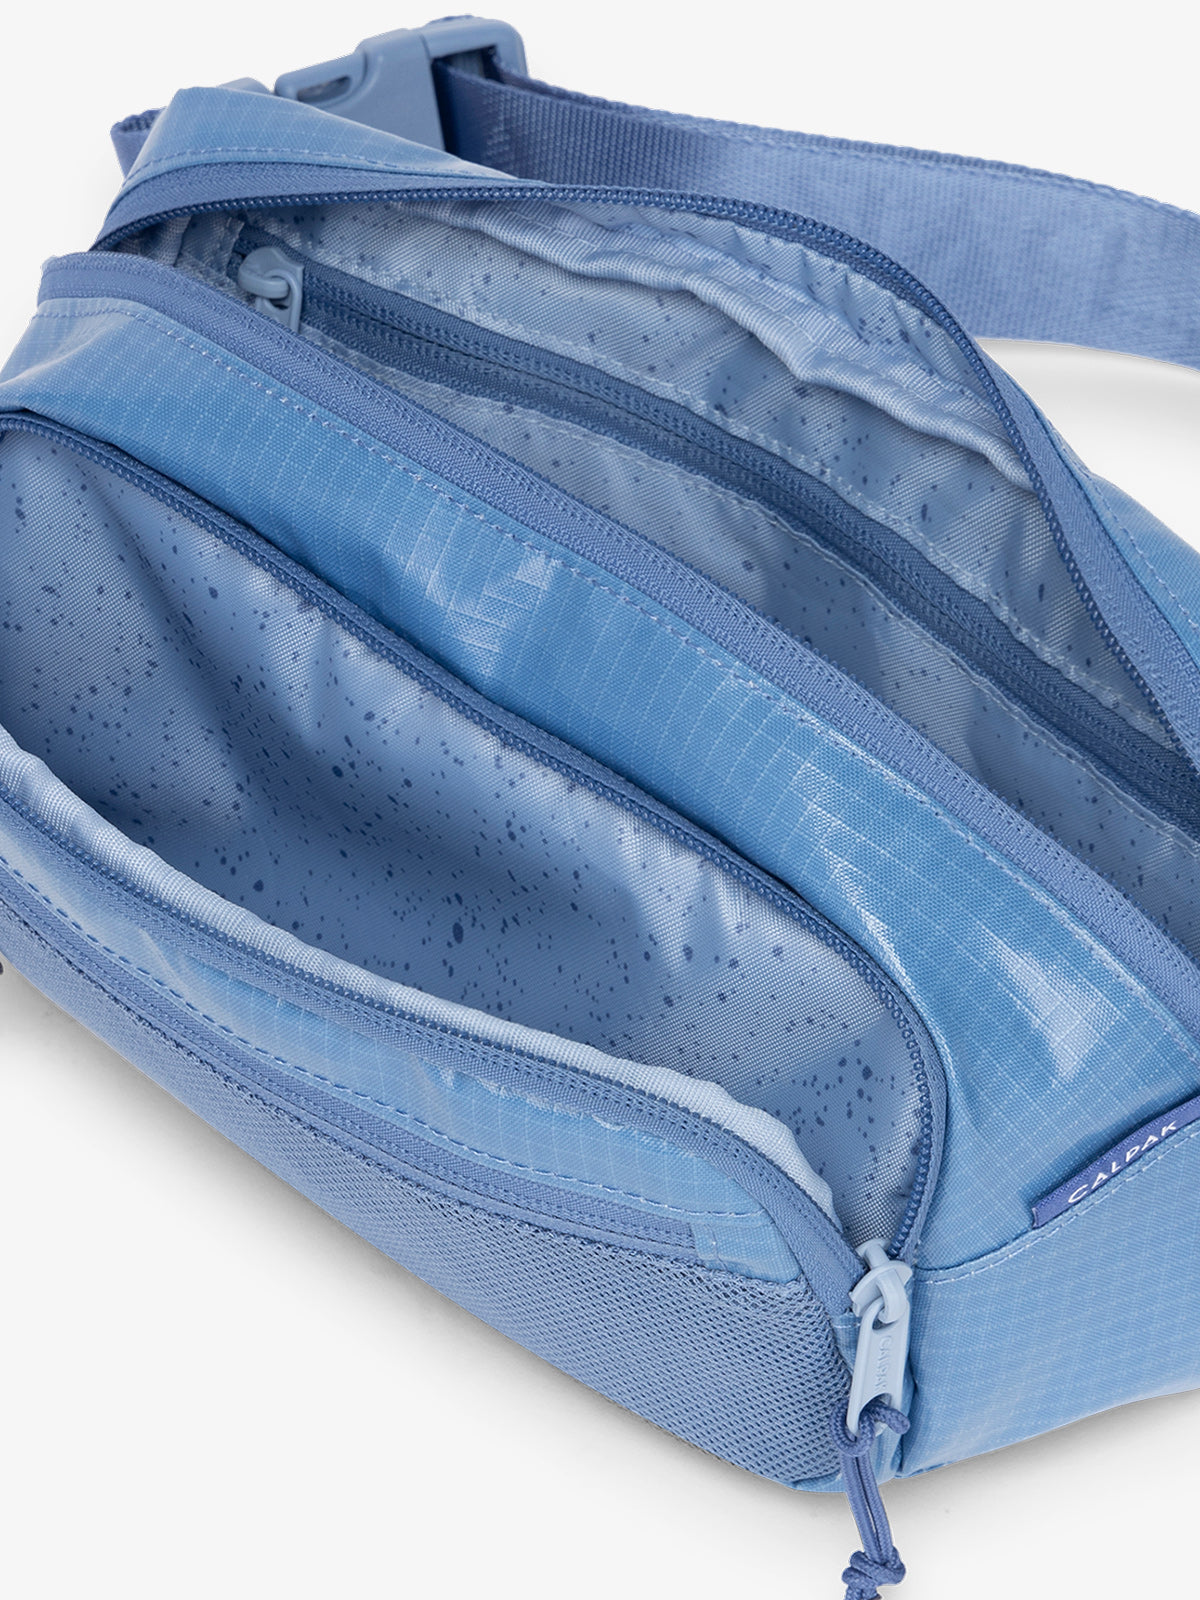 Terra small belt bag with multiple interior pockets and water resistant exterior in glacier blue